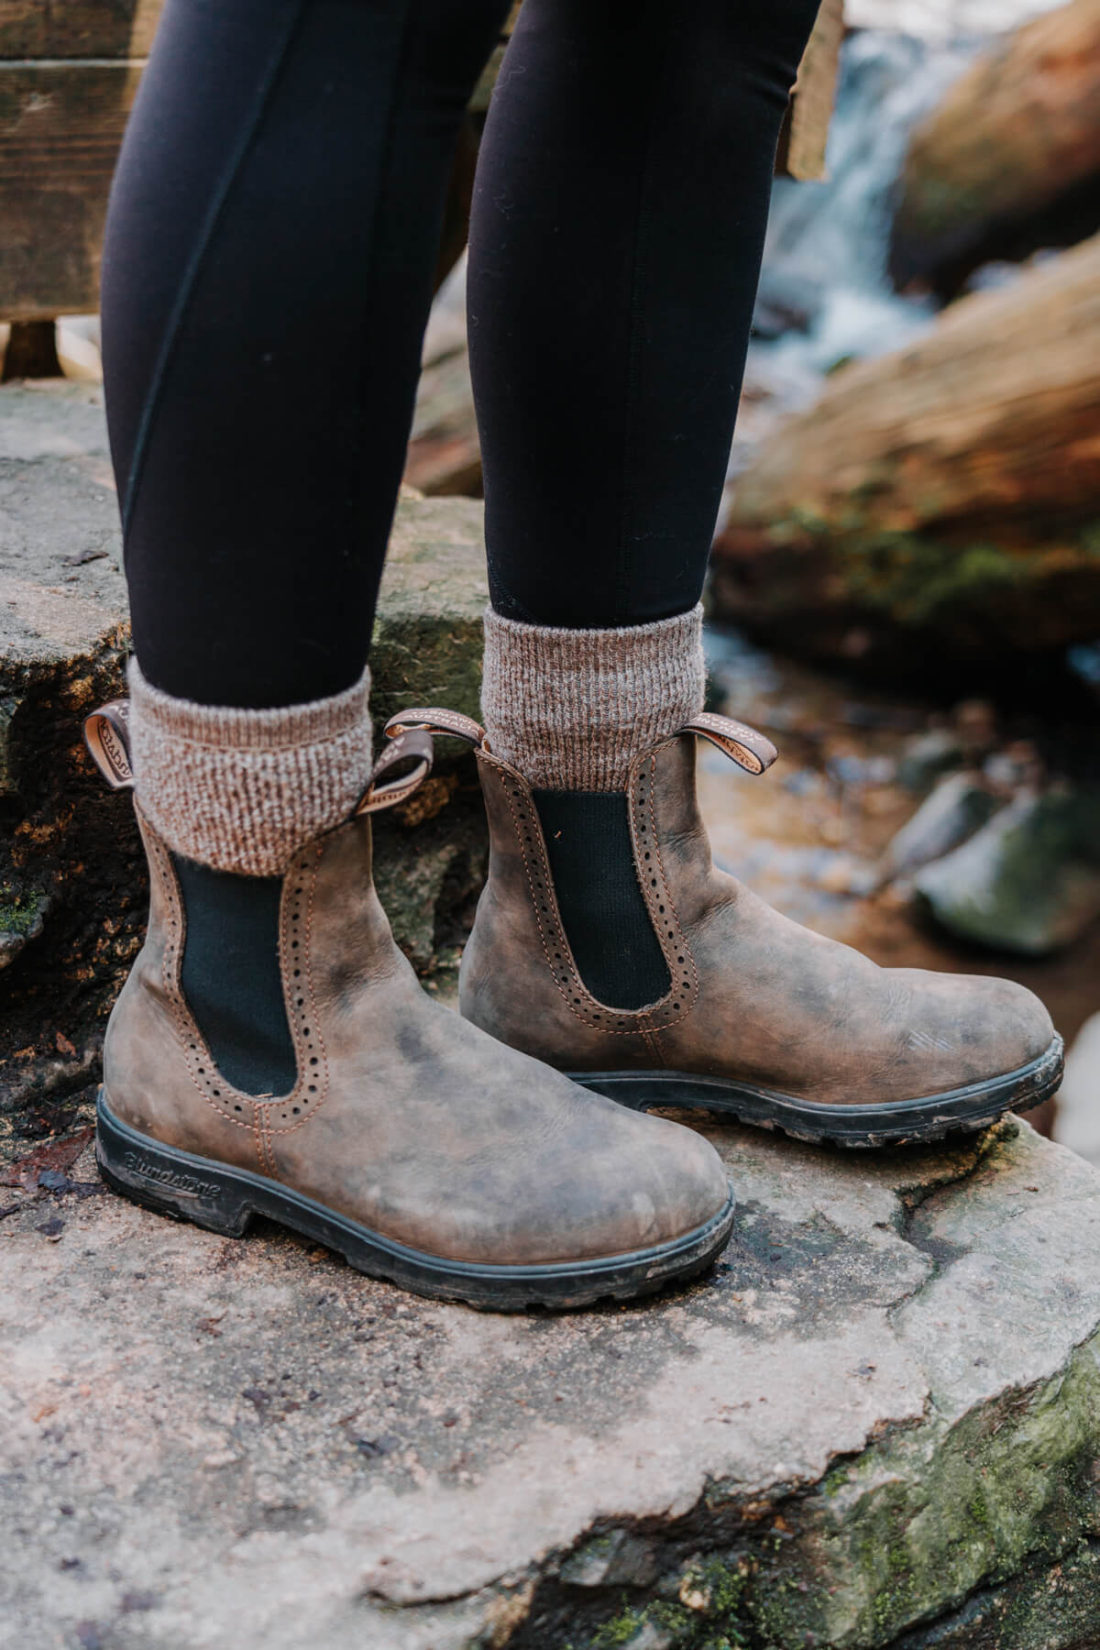 Are Blundstones Comfortable for Walking?